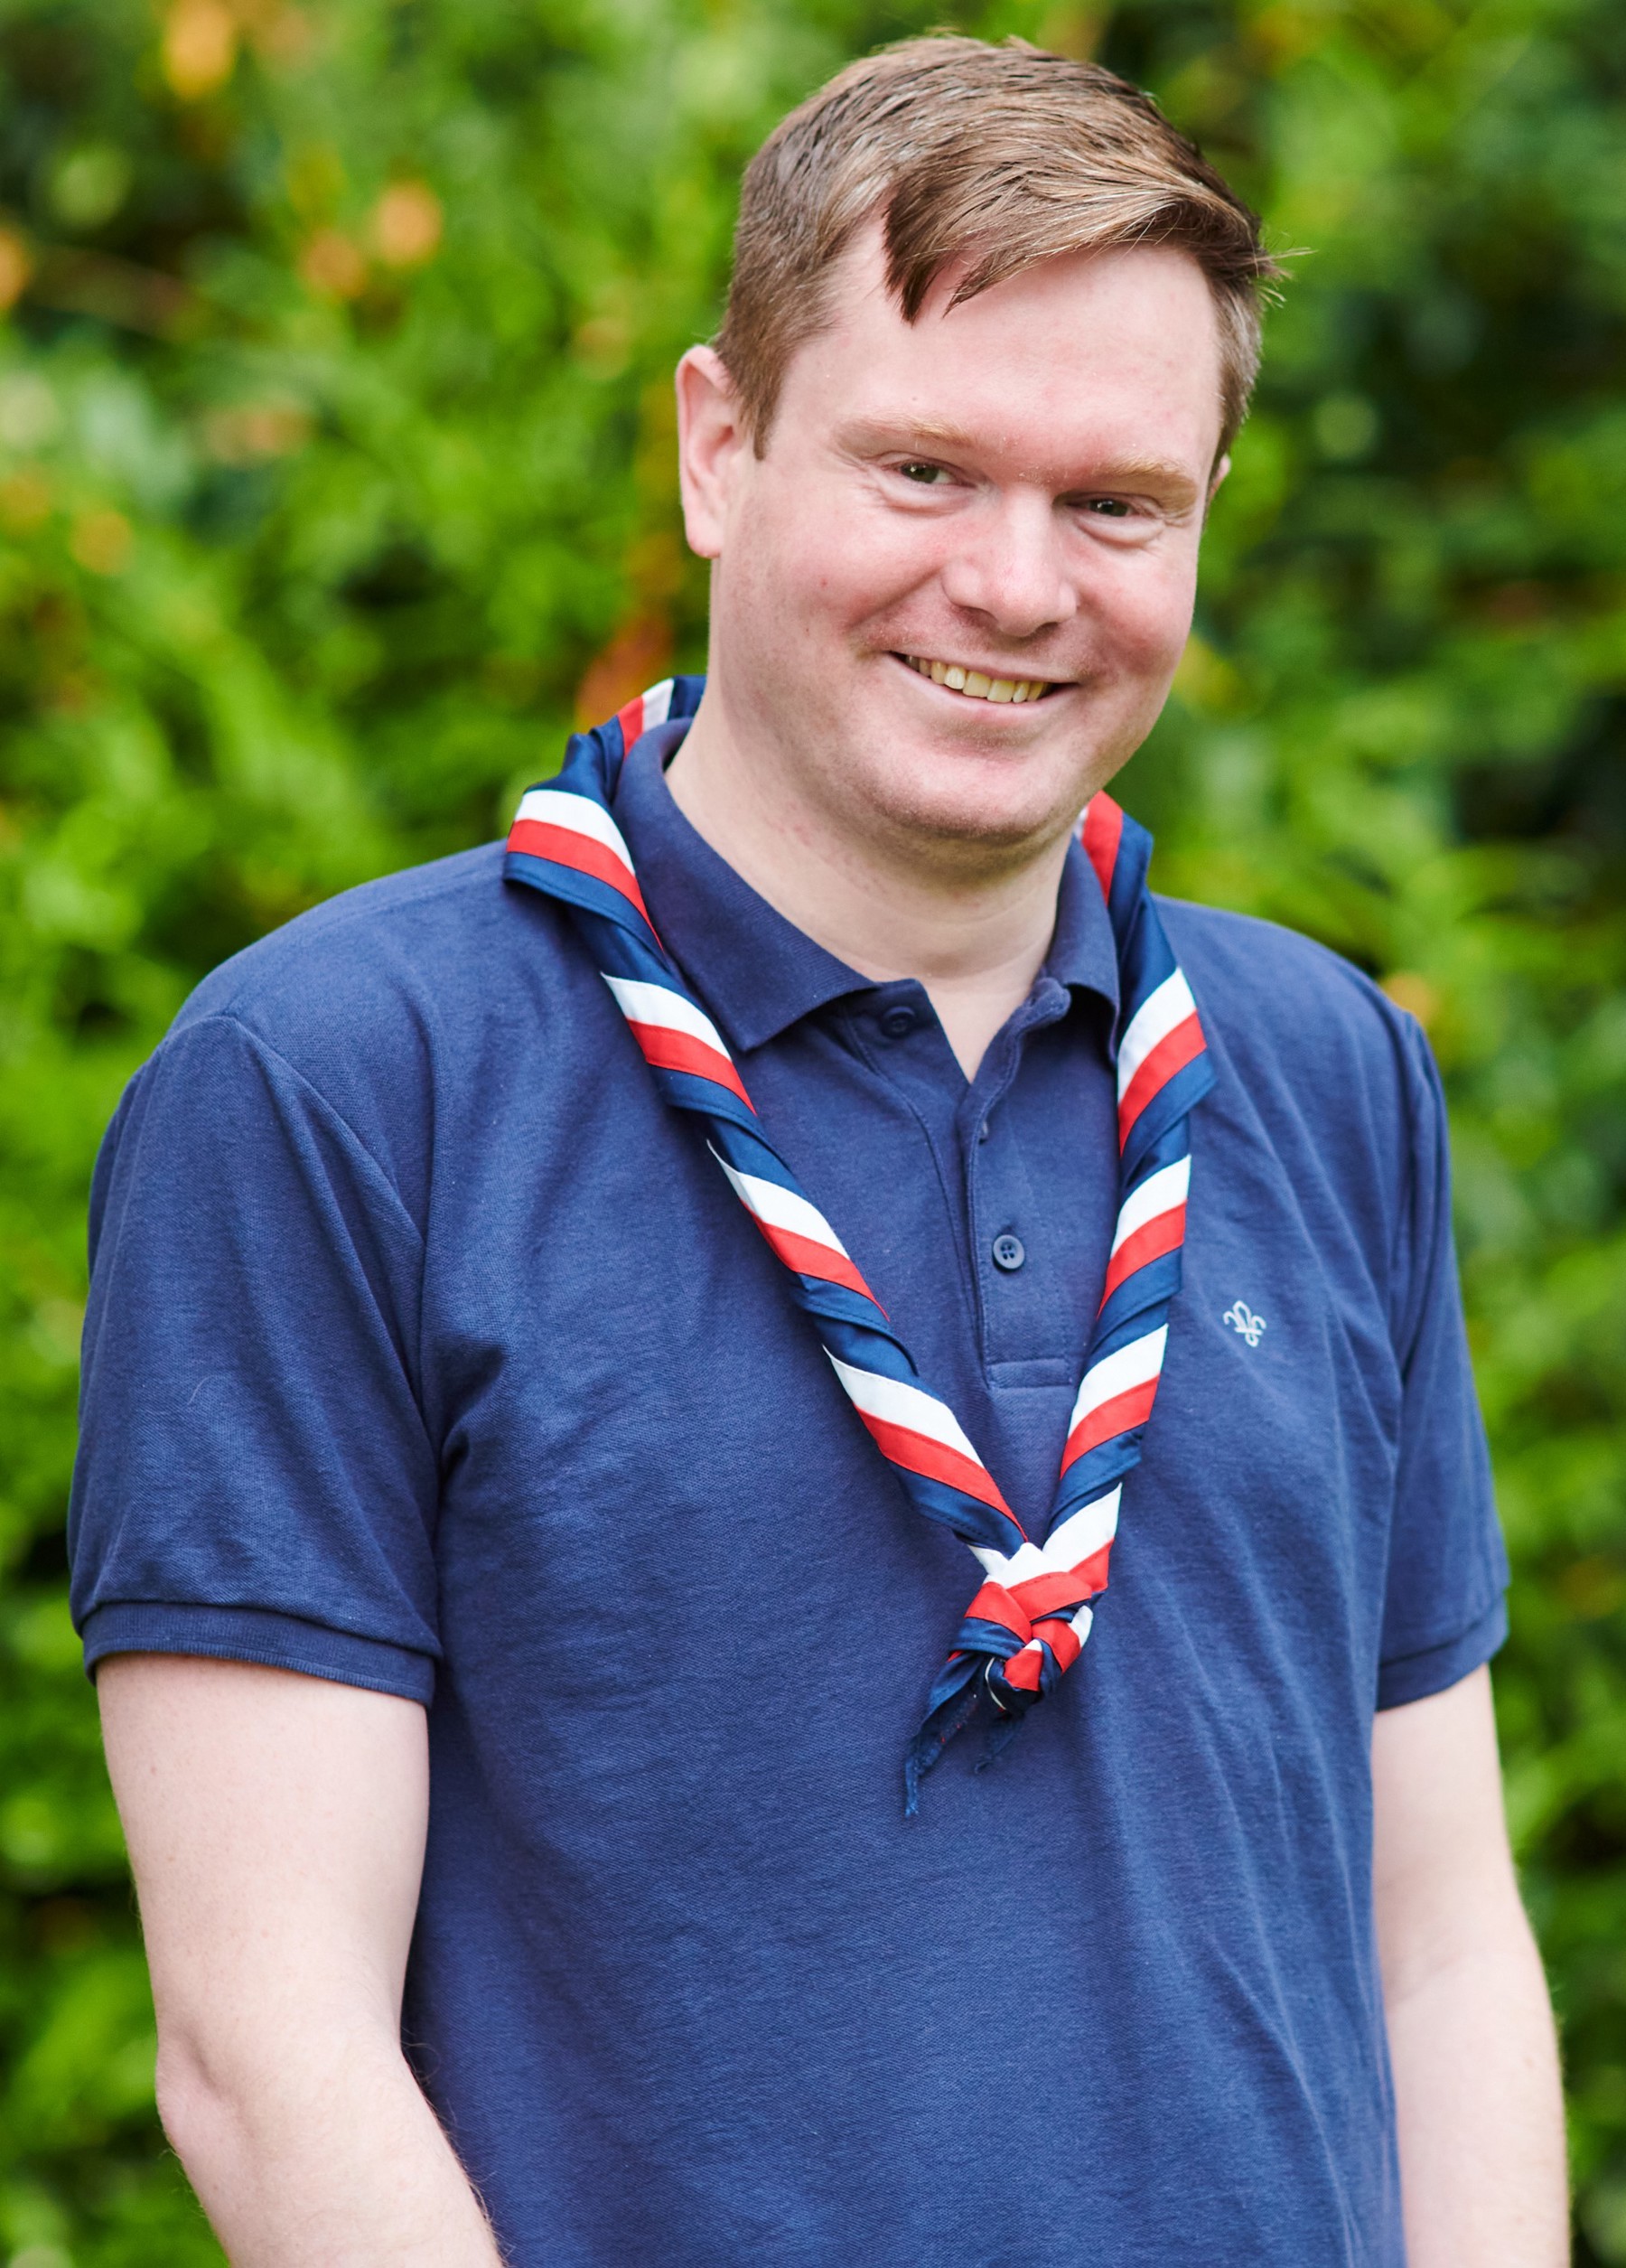 Craig Dewar-Willox smiling at the camera while wearing a navy Scouts polo shirt and stripy scarf